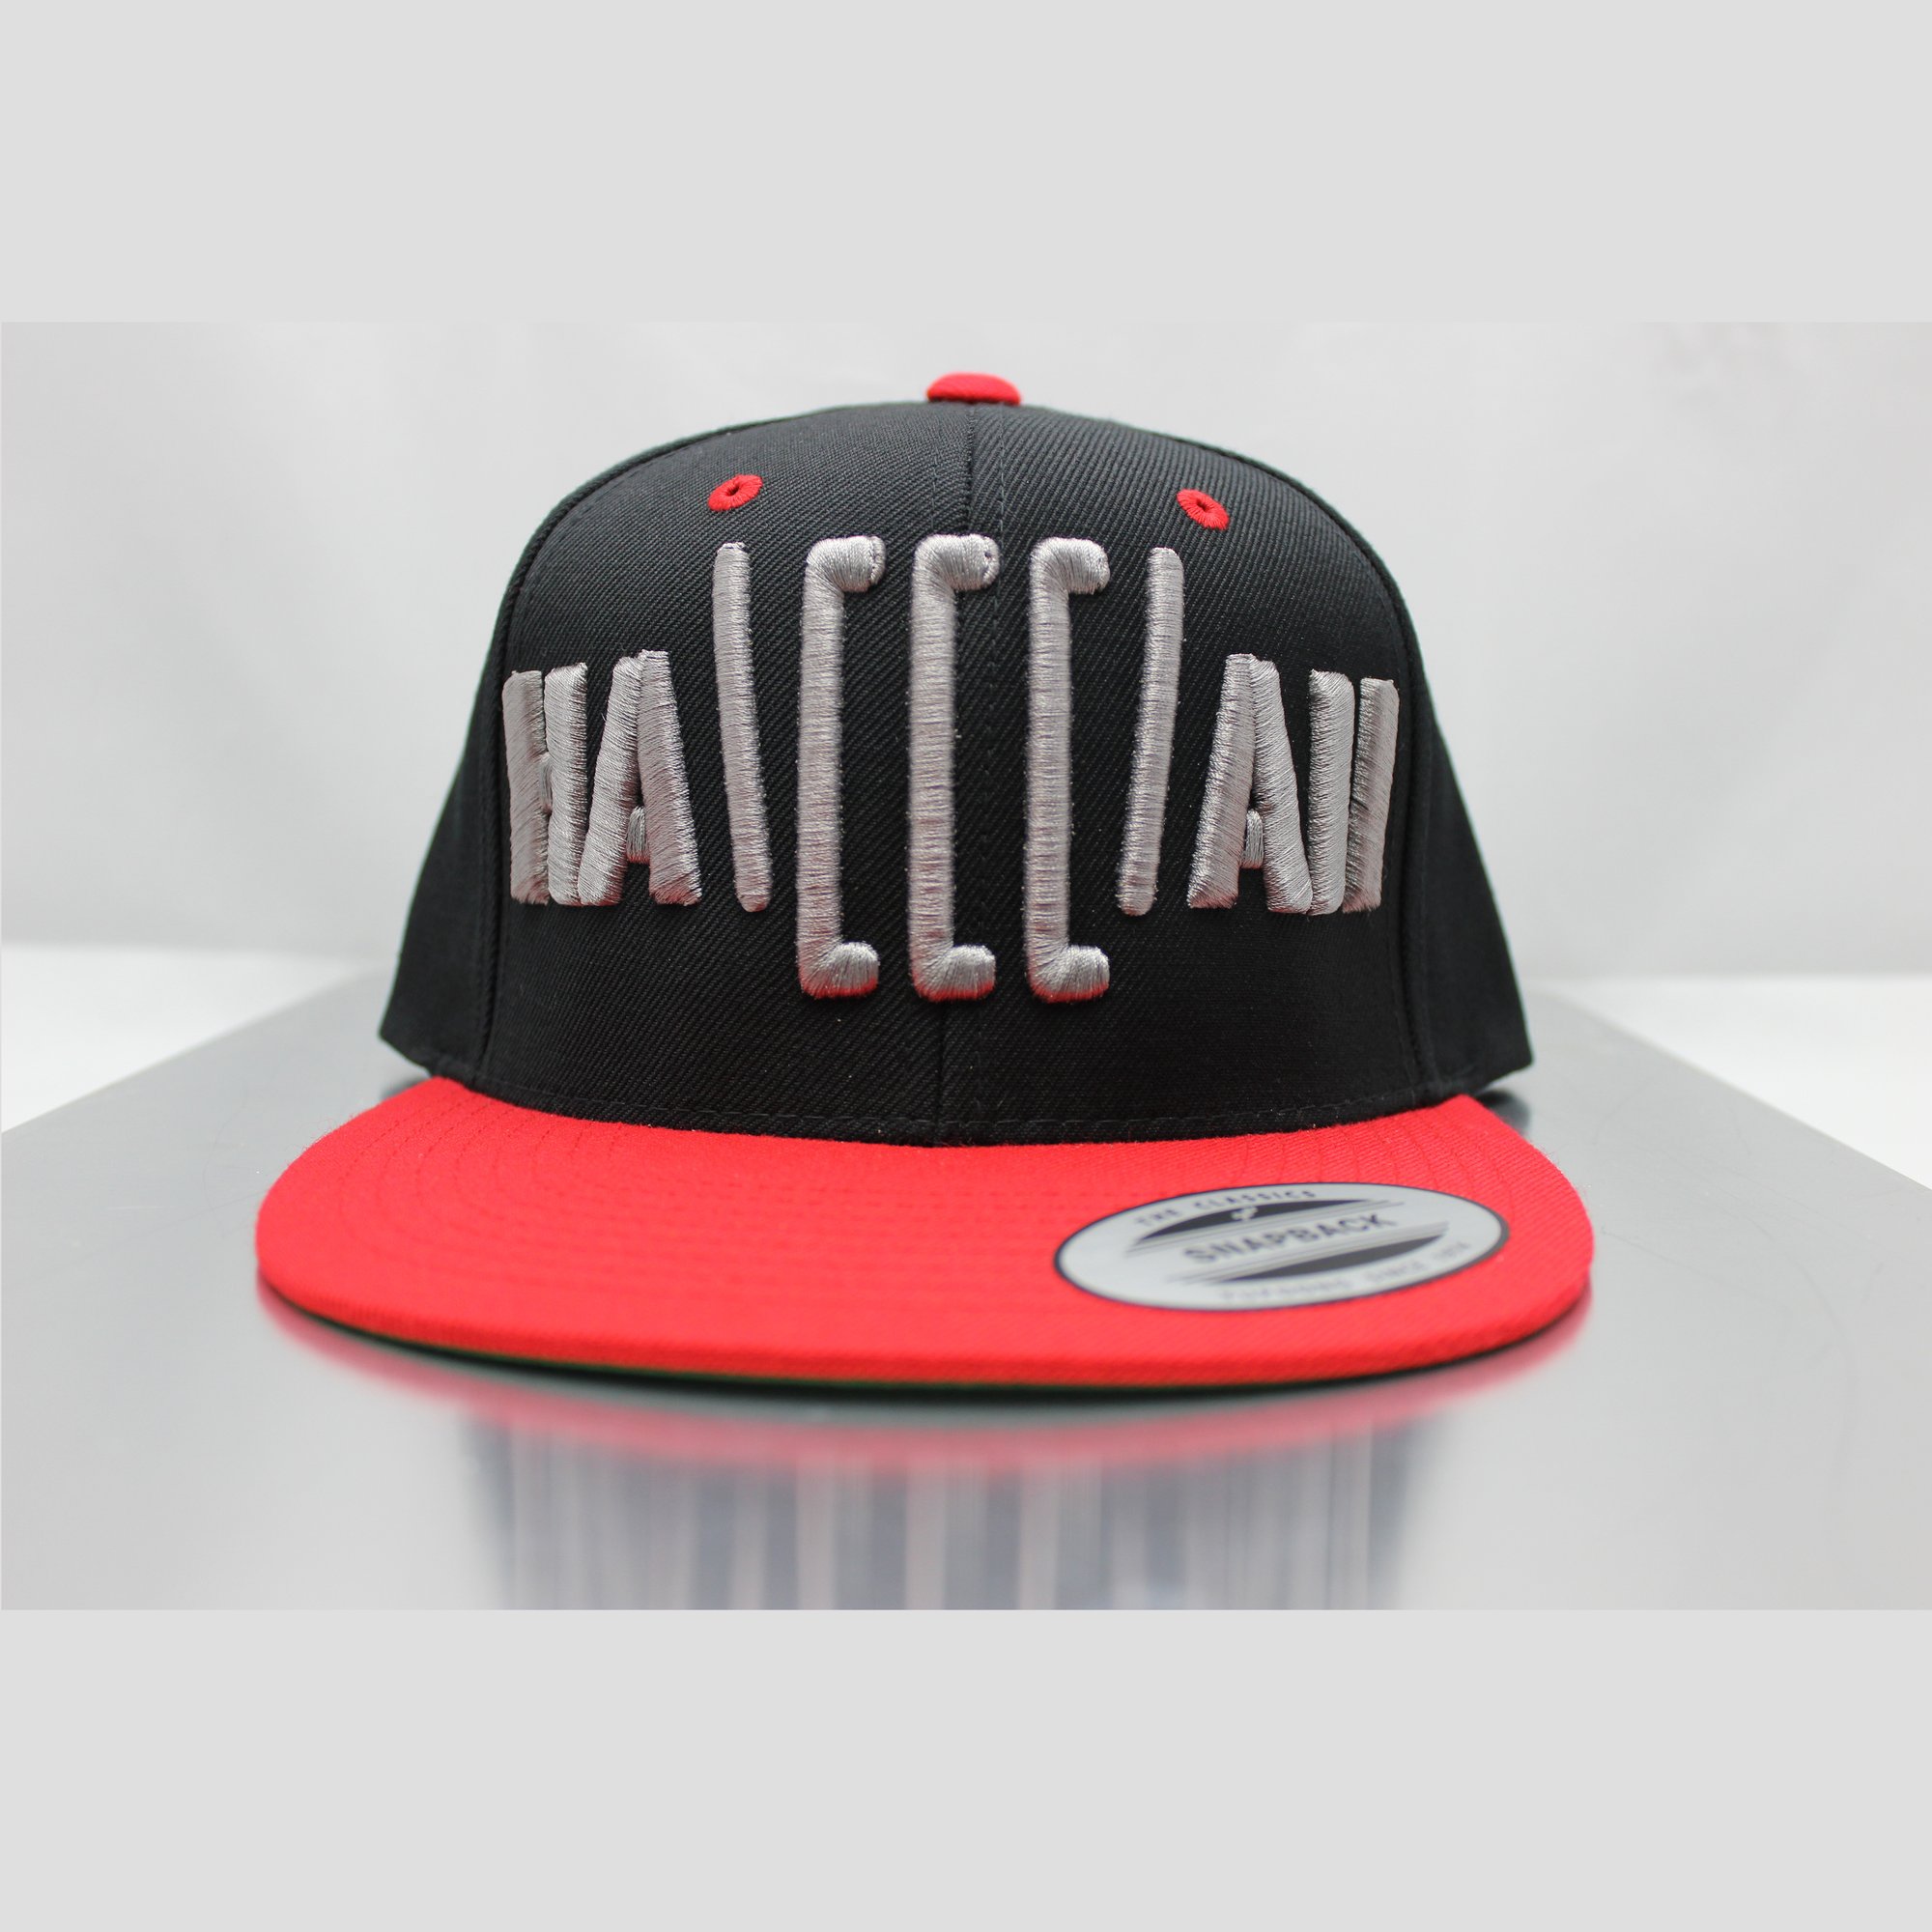 Image of HAWAII RESnapback_RED_BLK_GRY